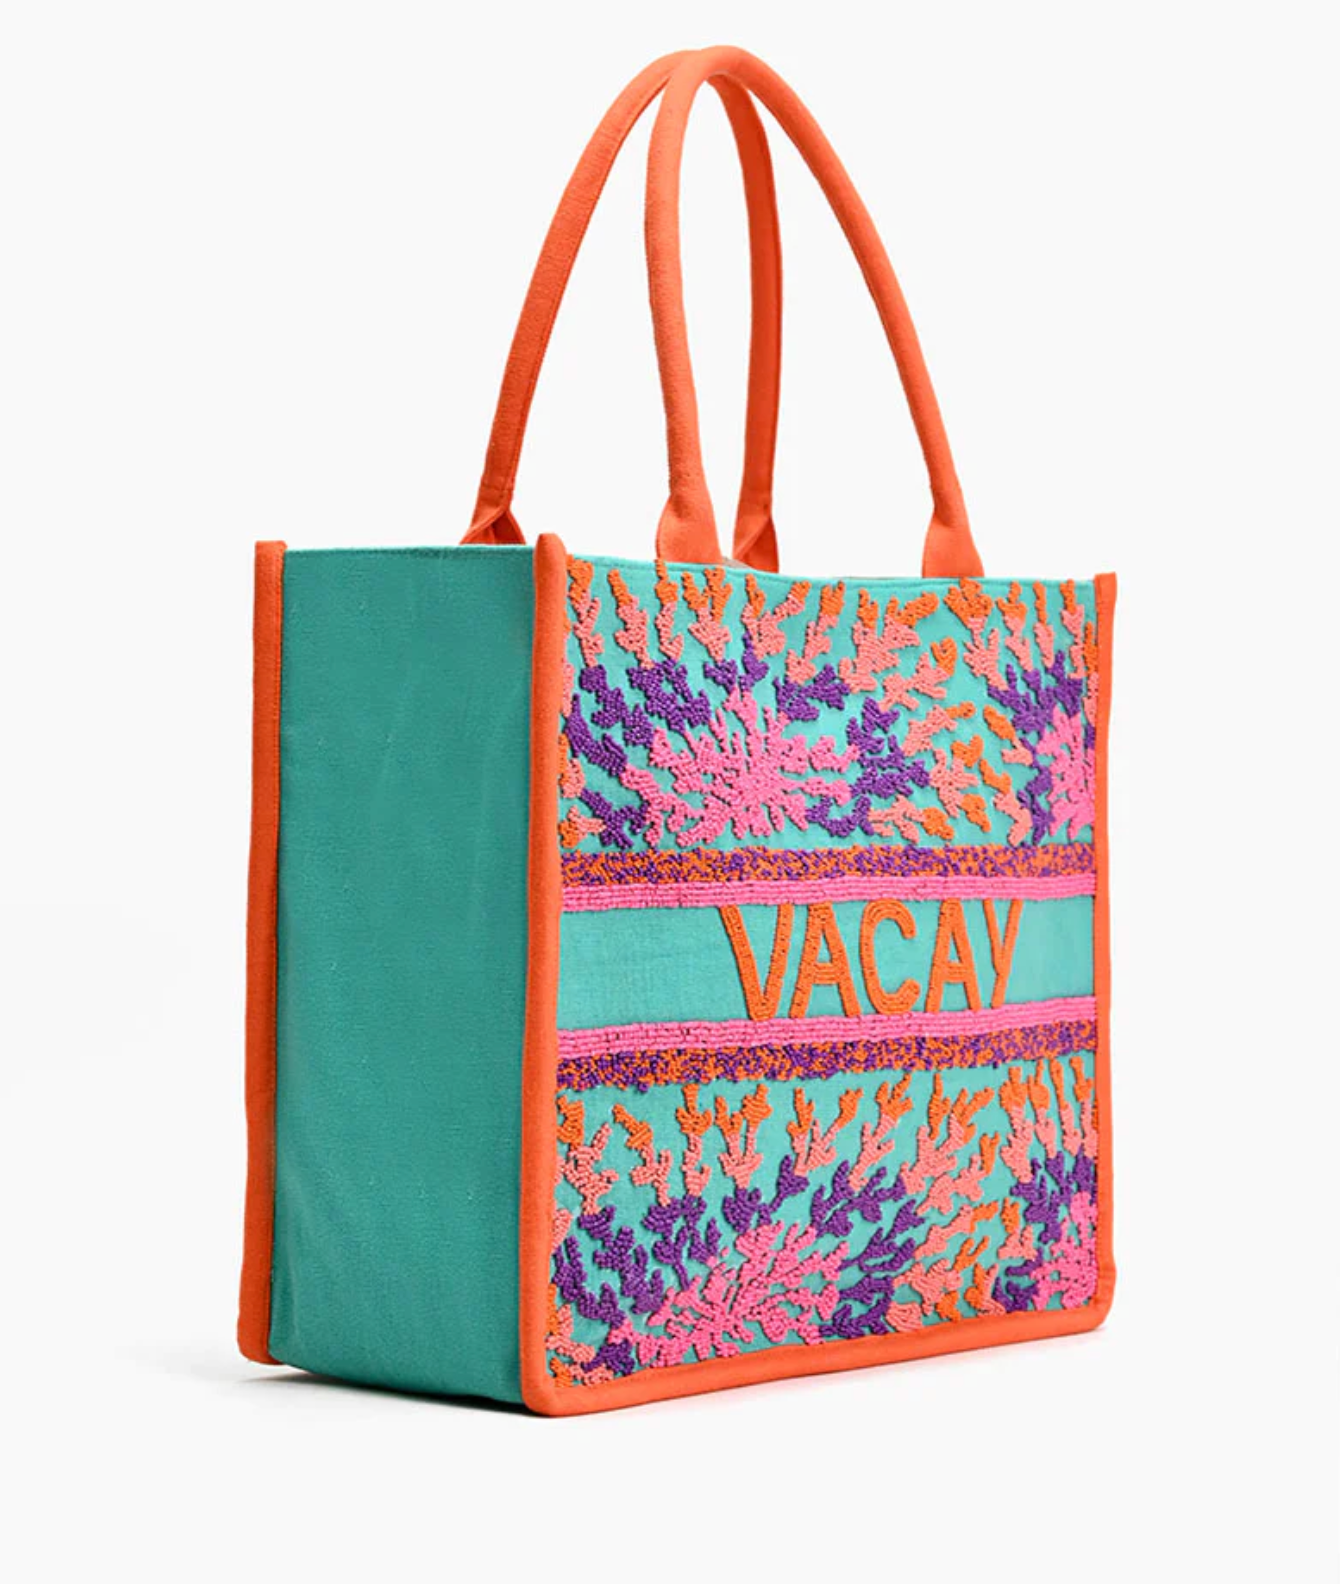 Caribbean Vacay Tote - The French Shoppe